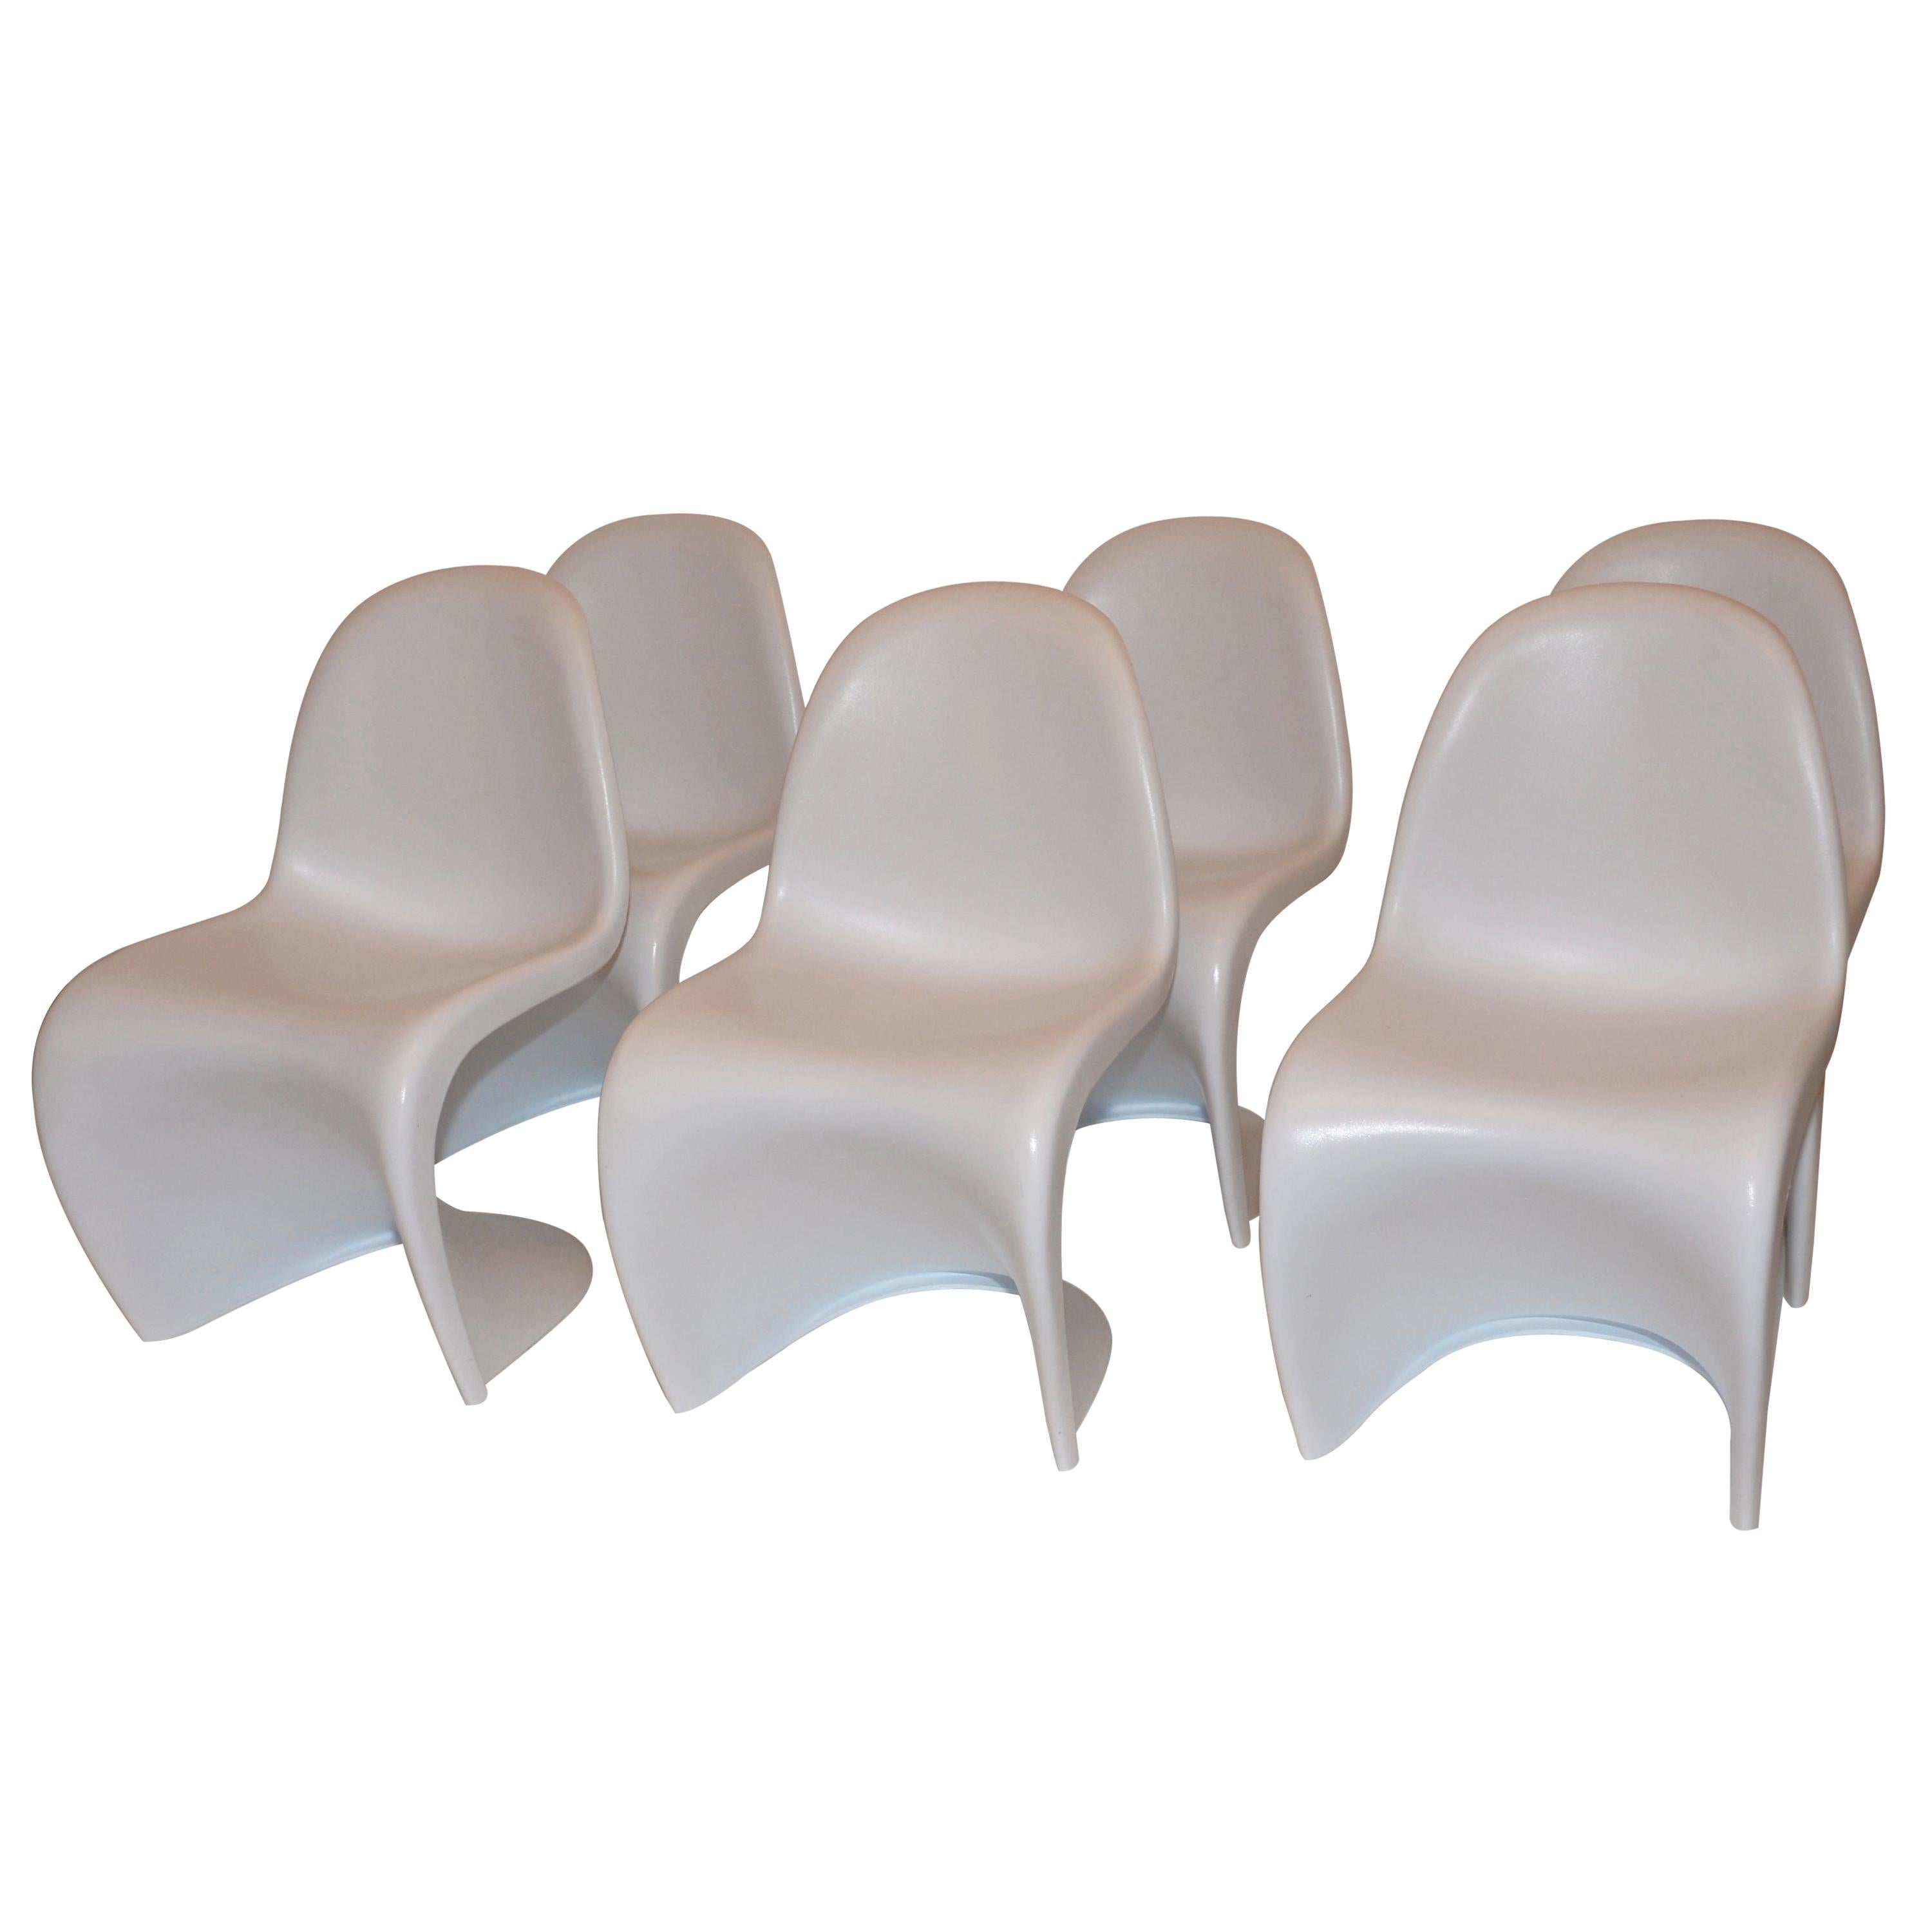 Set of Six Chairs in the Style of the Verner Panton S Chair